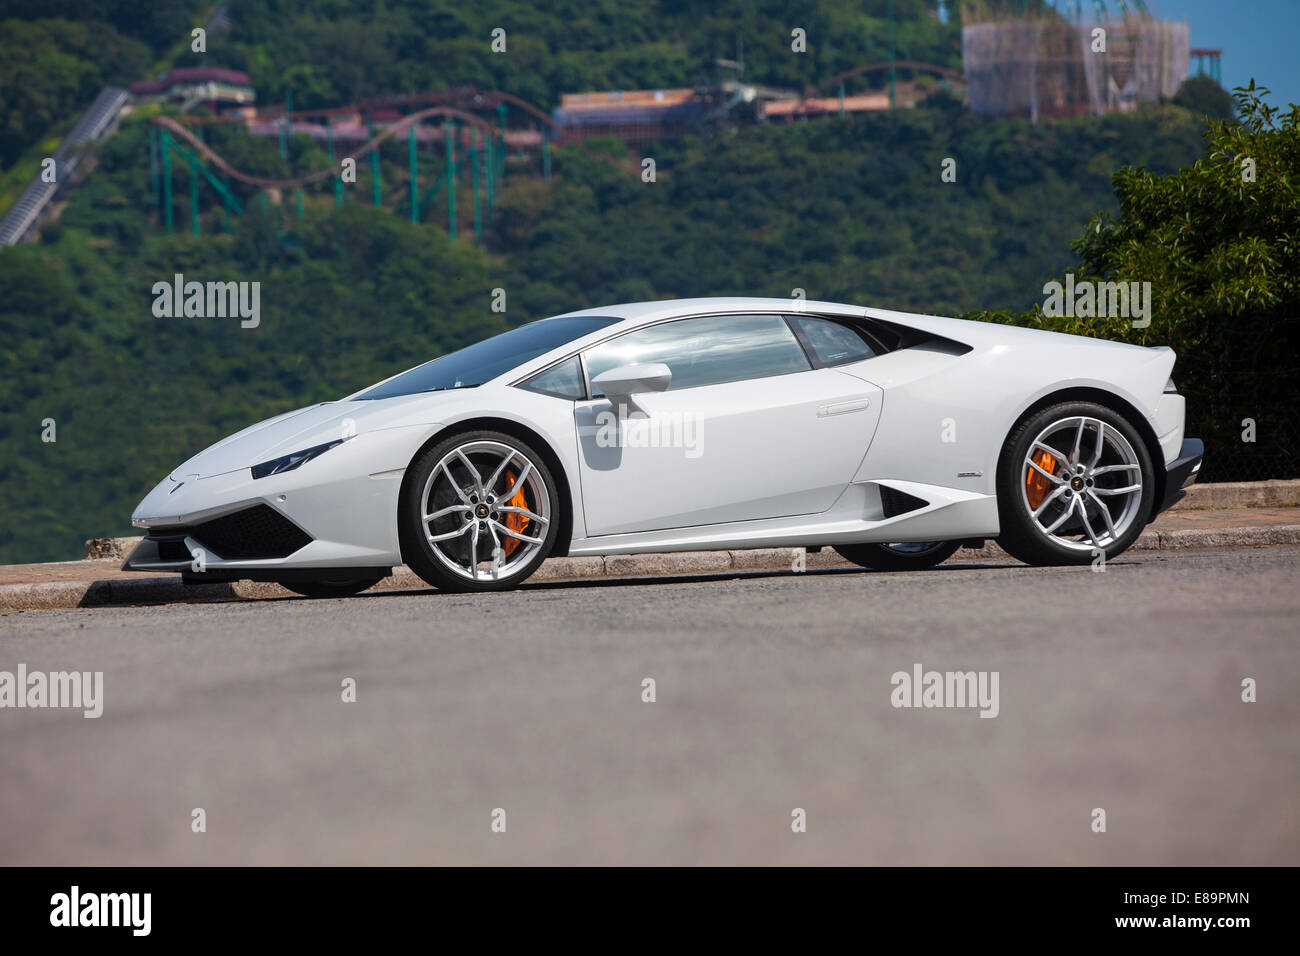 Aberdeen, Hong Kong, 18th Sep, 2014. Side view of the new Lamborghini Huracan sports car, parked near a shipyard. Photoshoot for Asia Pacific Boating Magazine. Stock Photo